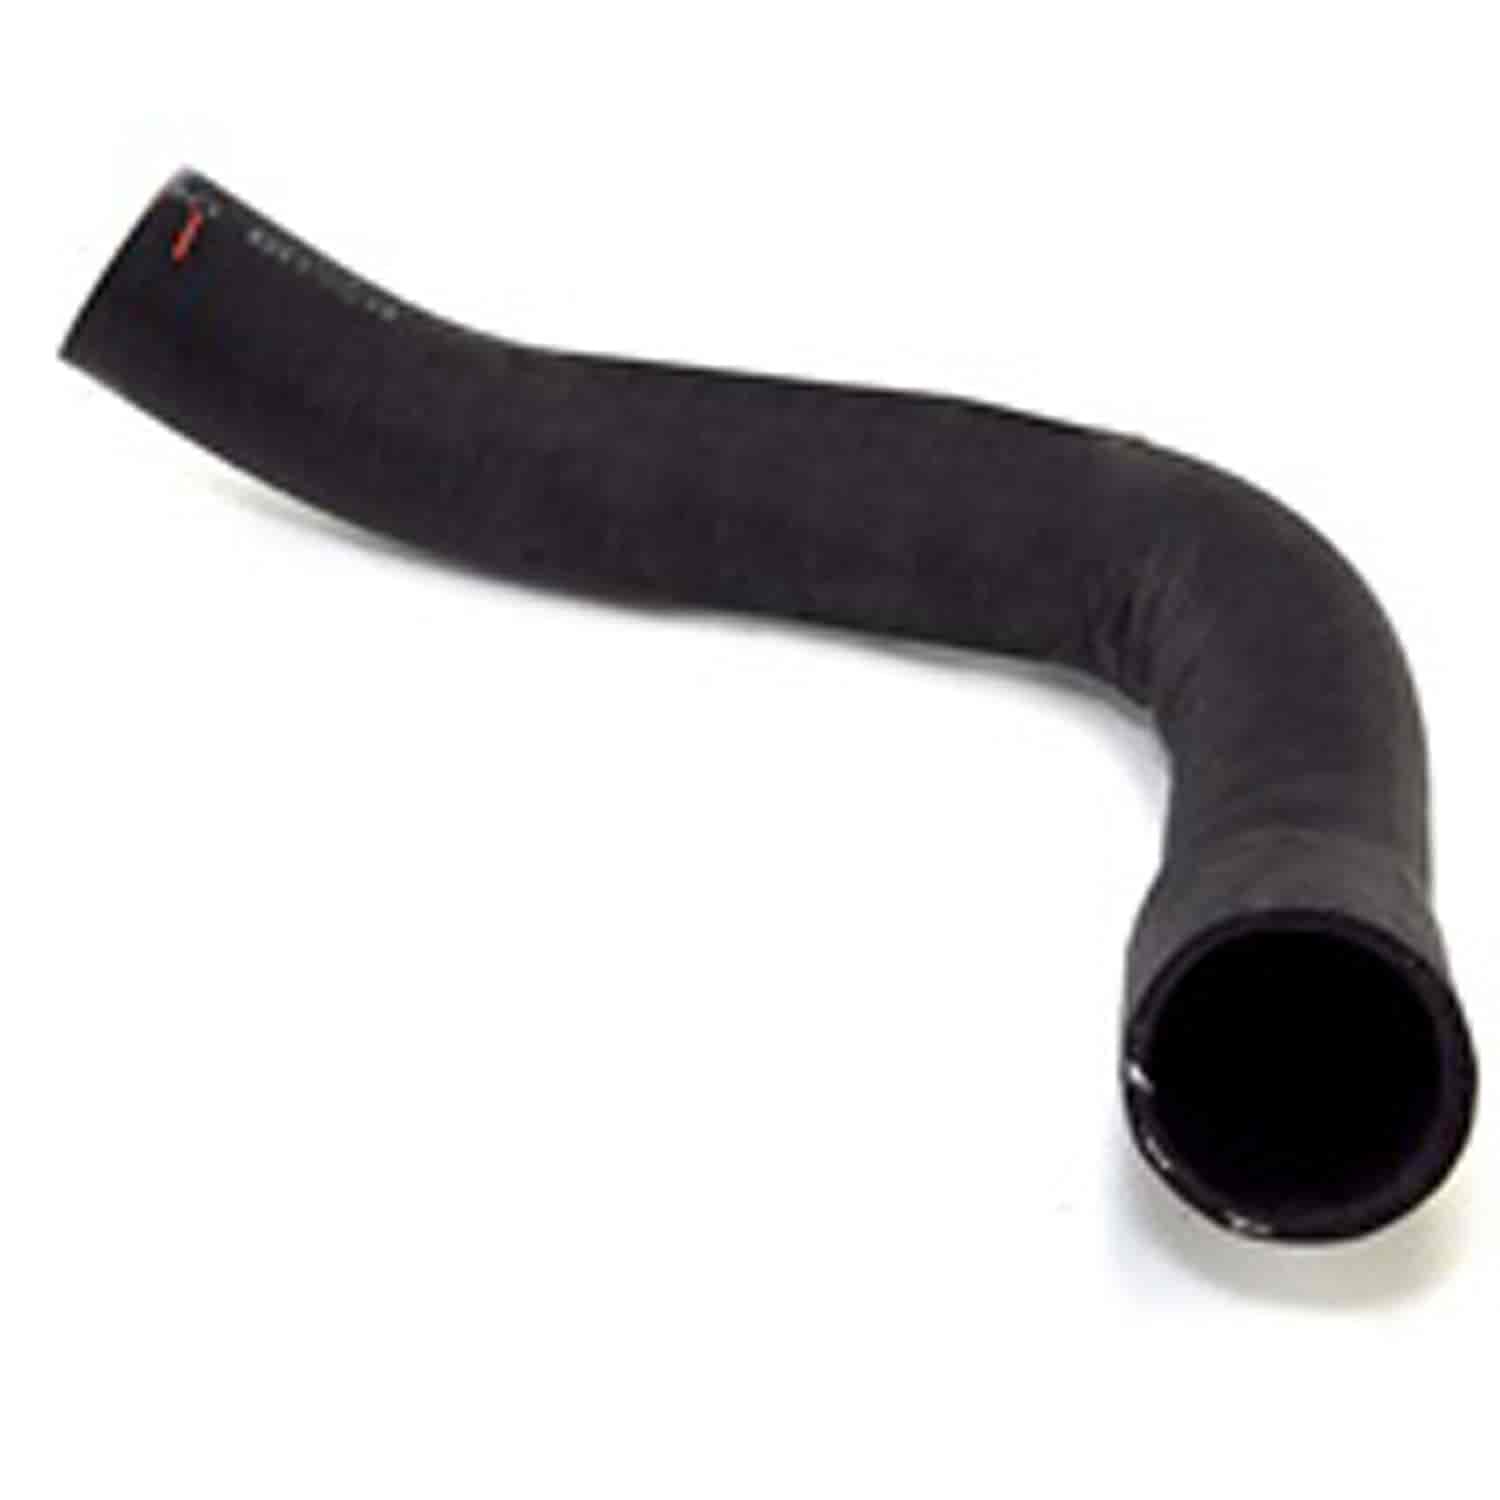 Stock replacement upper radiator hose from Omix-ADA, Fits